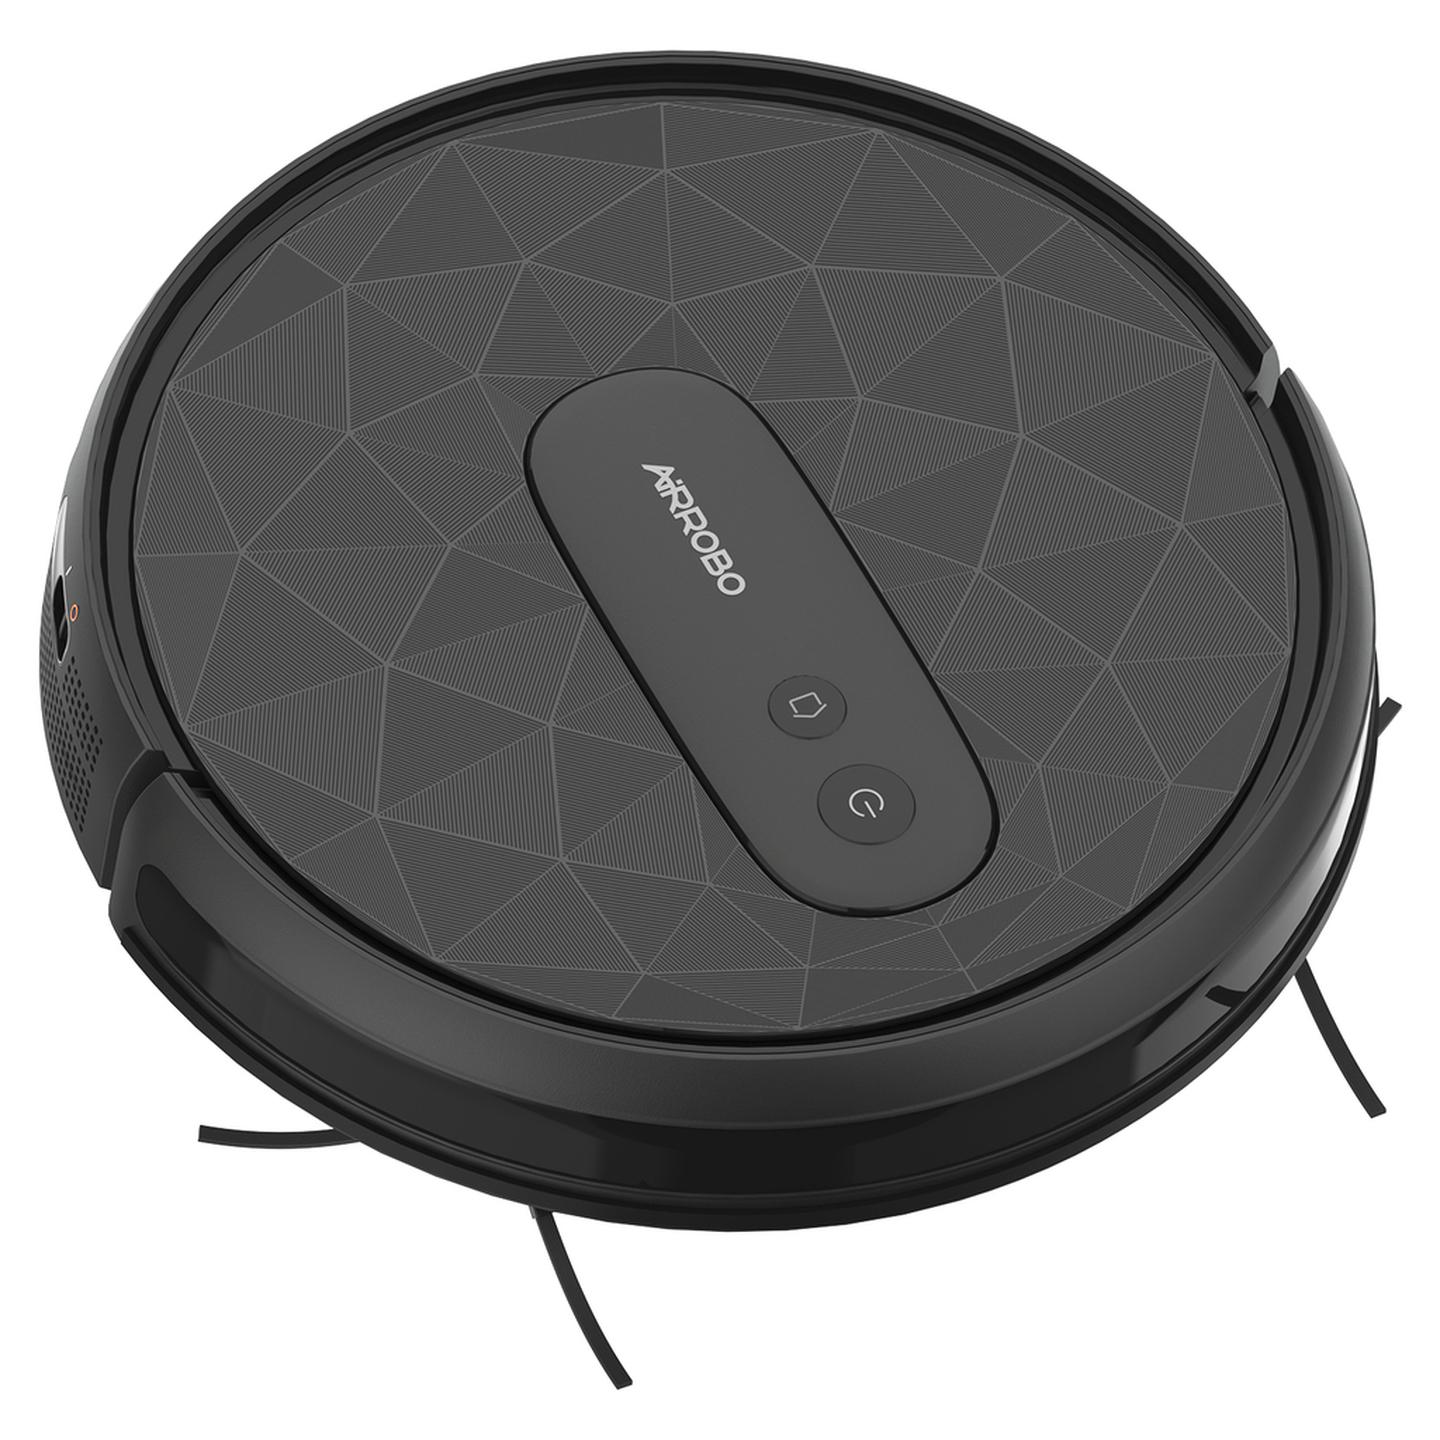 AIRROBO P20 Vacuum Cleaner with Gyroscope and Hepa Filter